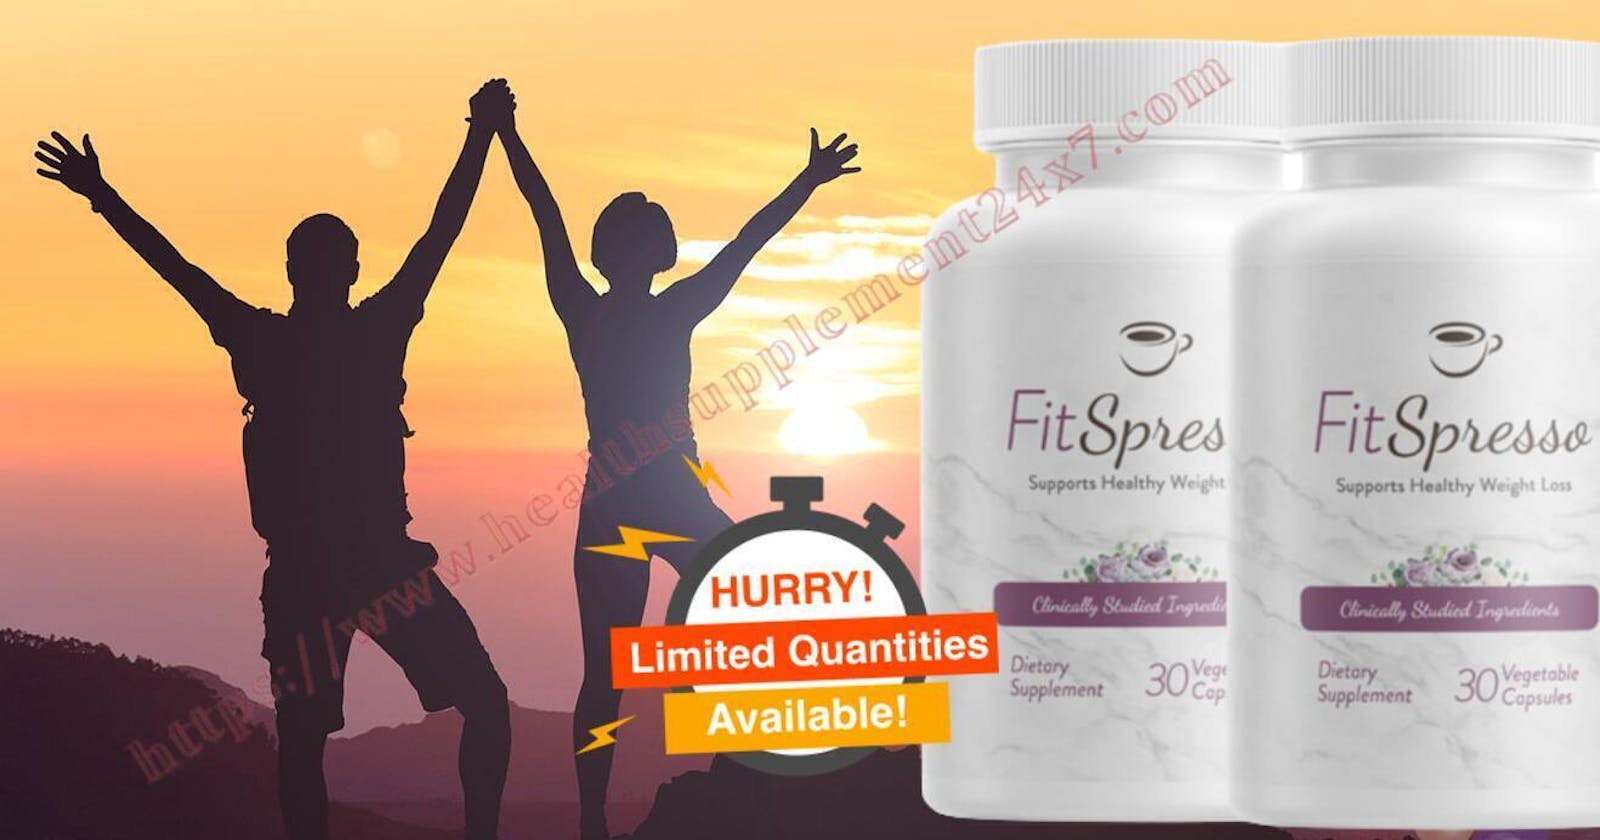 FitSpresso Weight Loss Support Healthy Fat Burning, Increase Metabolism And Maintain Overall Body(REAL OR HOAX)